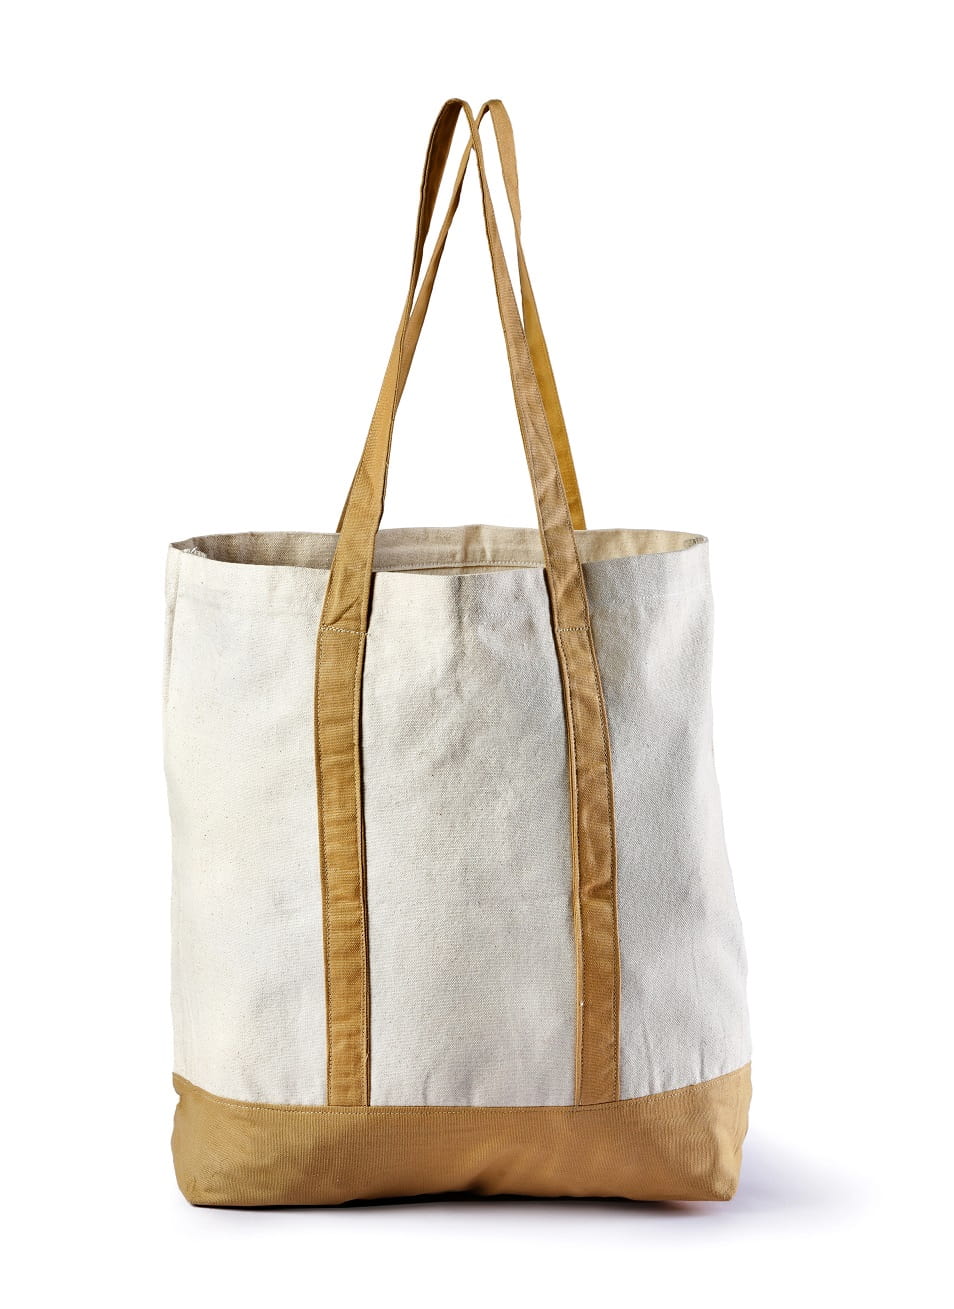 Canvas Beach Bags Manufacturer and Exporter from Kolkata India